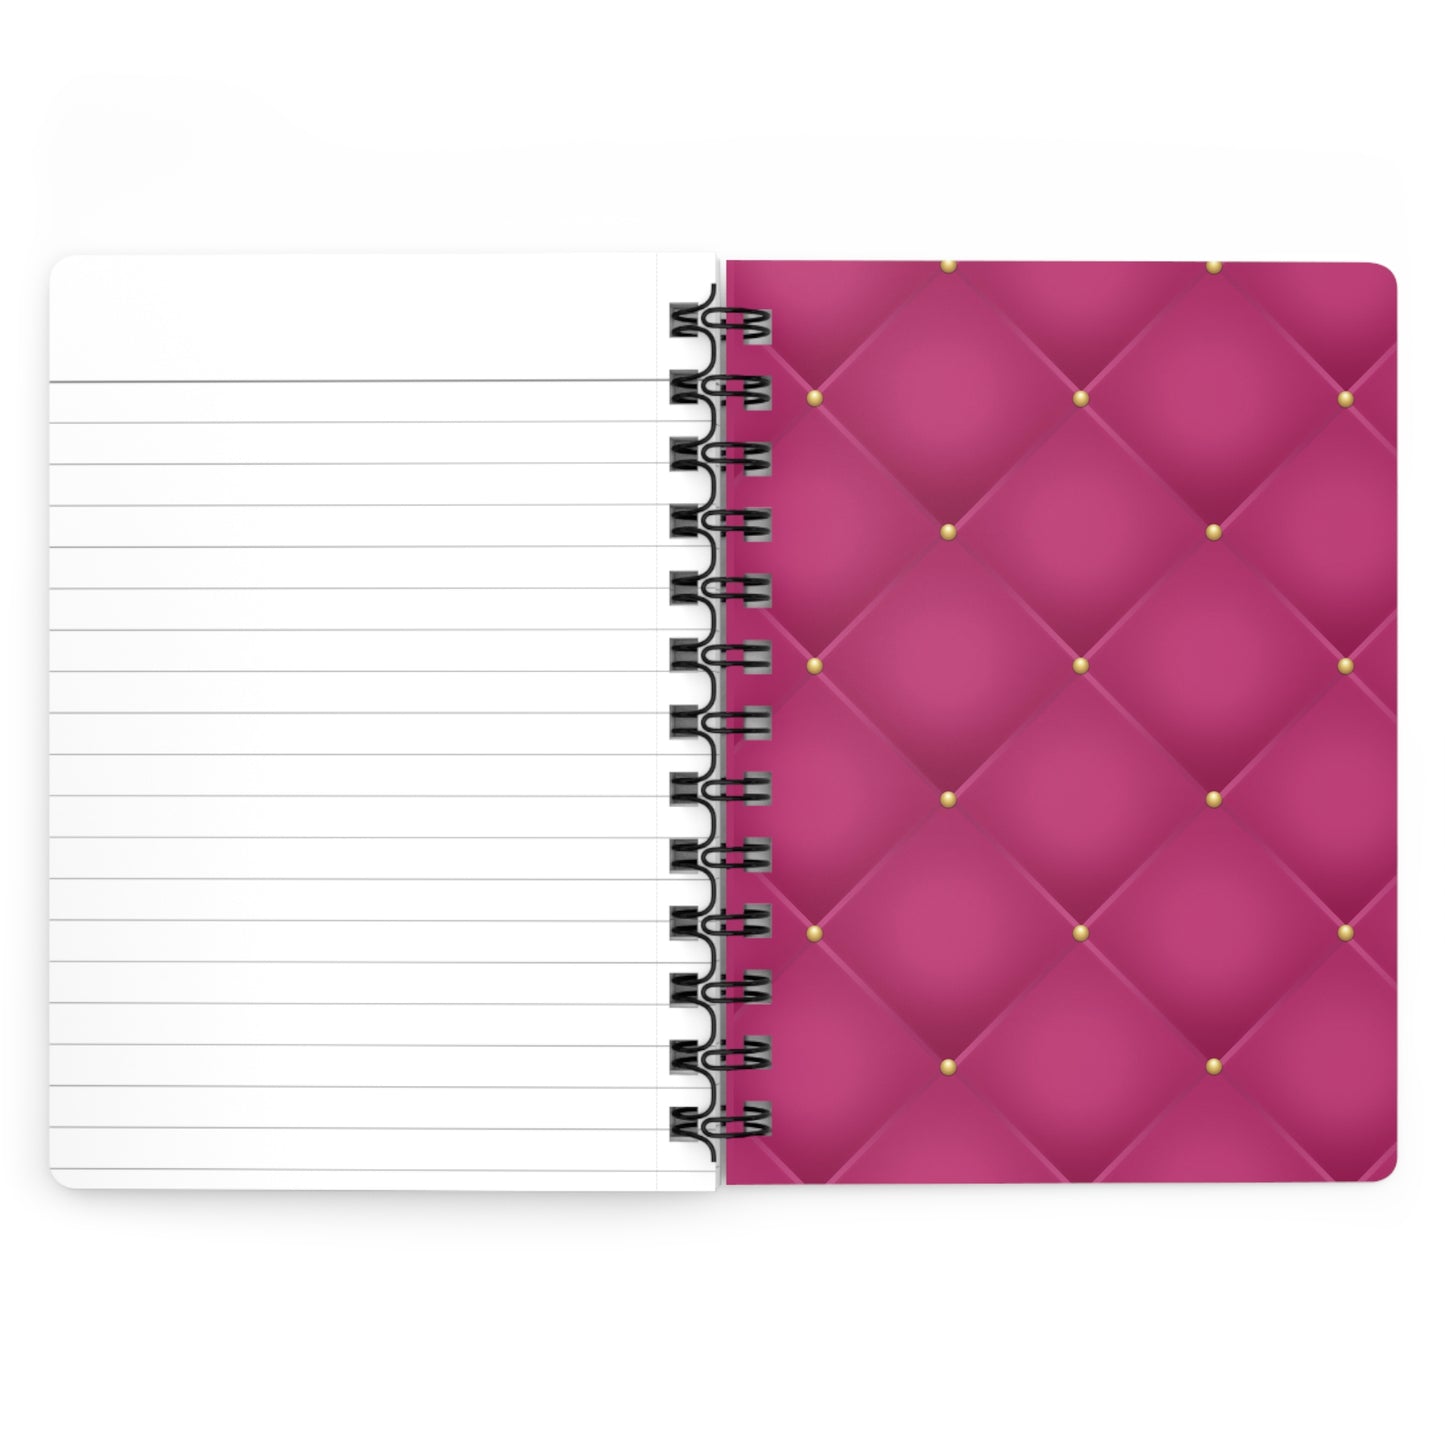 Stop for one minute Tufted Print Bright Pink and Gold Spiral Bound Journal